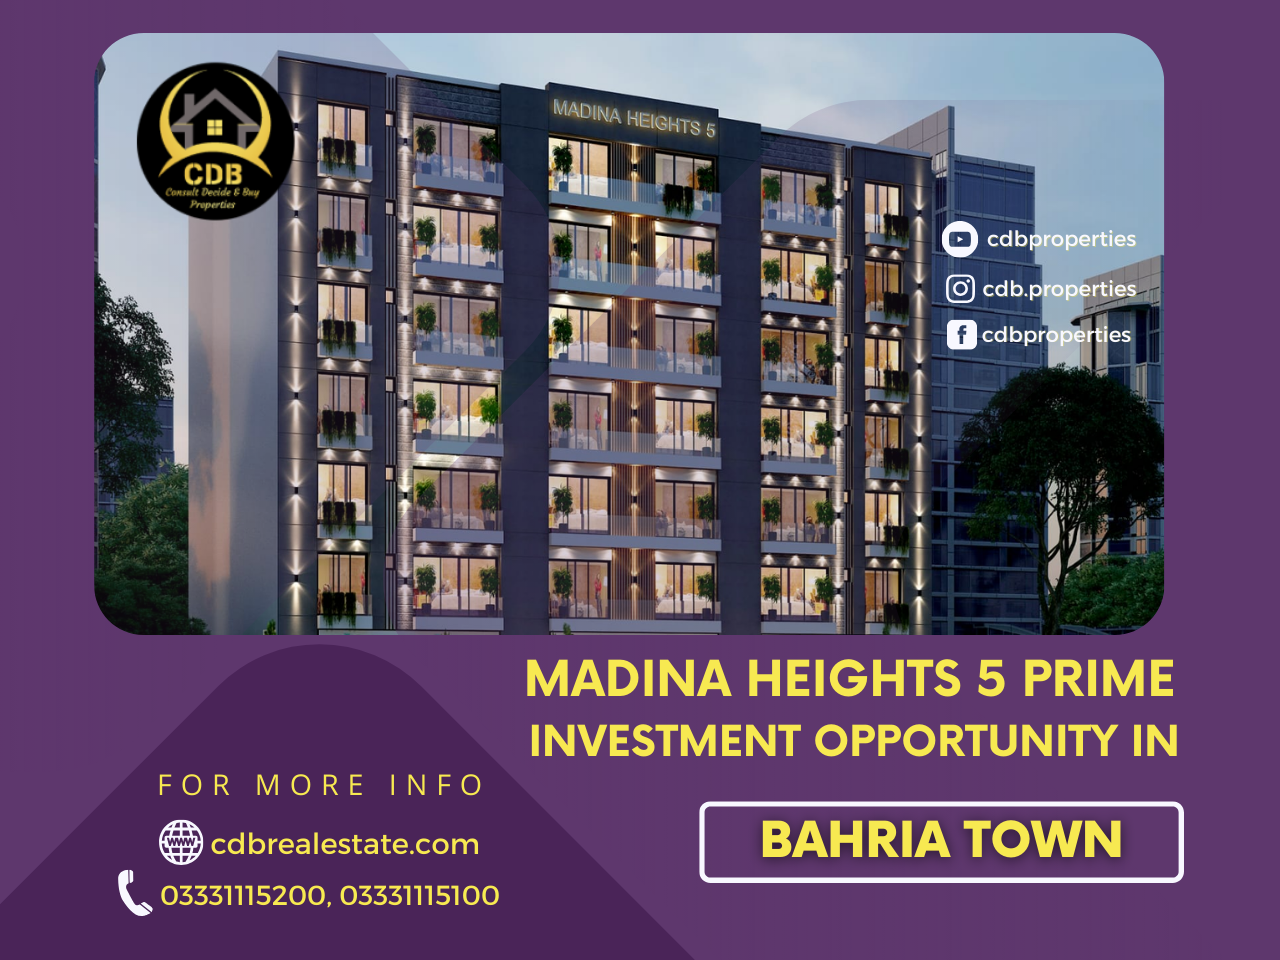 Madina Heights 5: Prime Investment Opportunity in Bahria Town